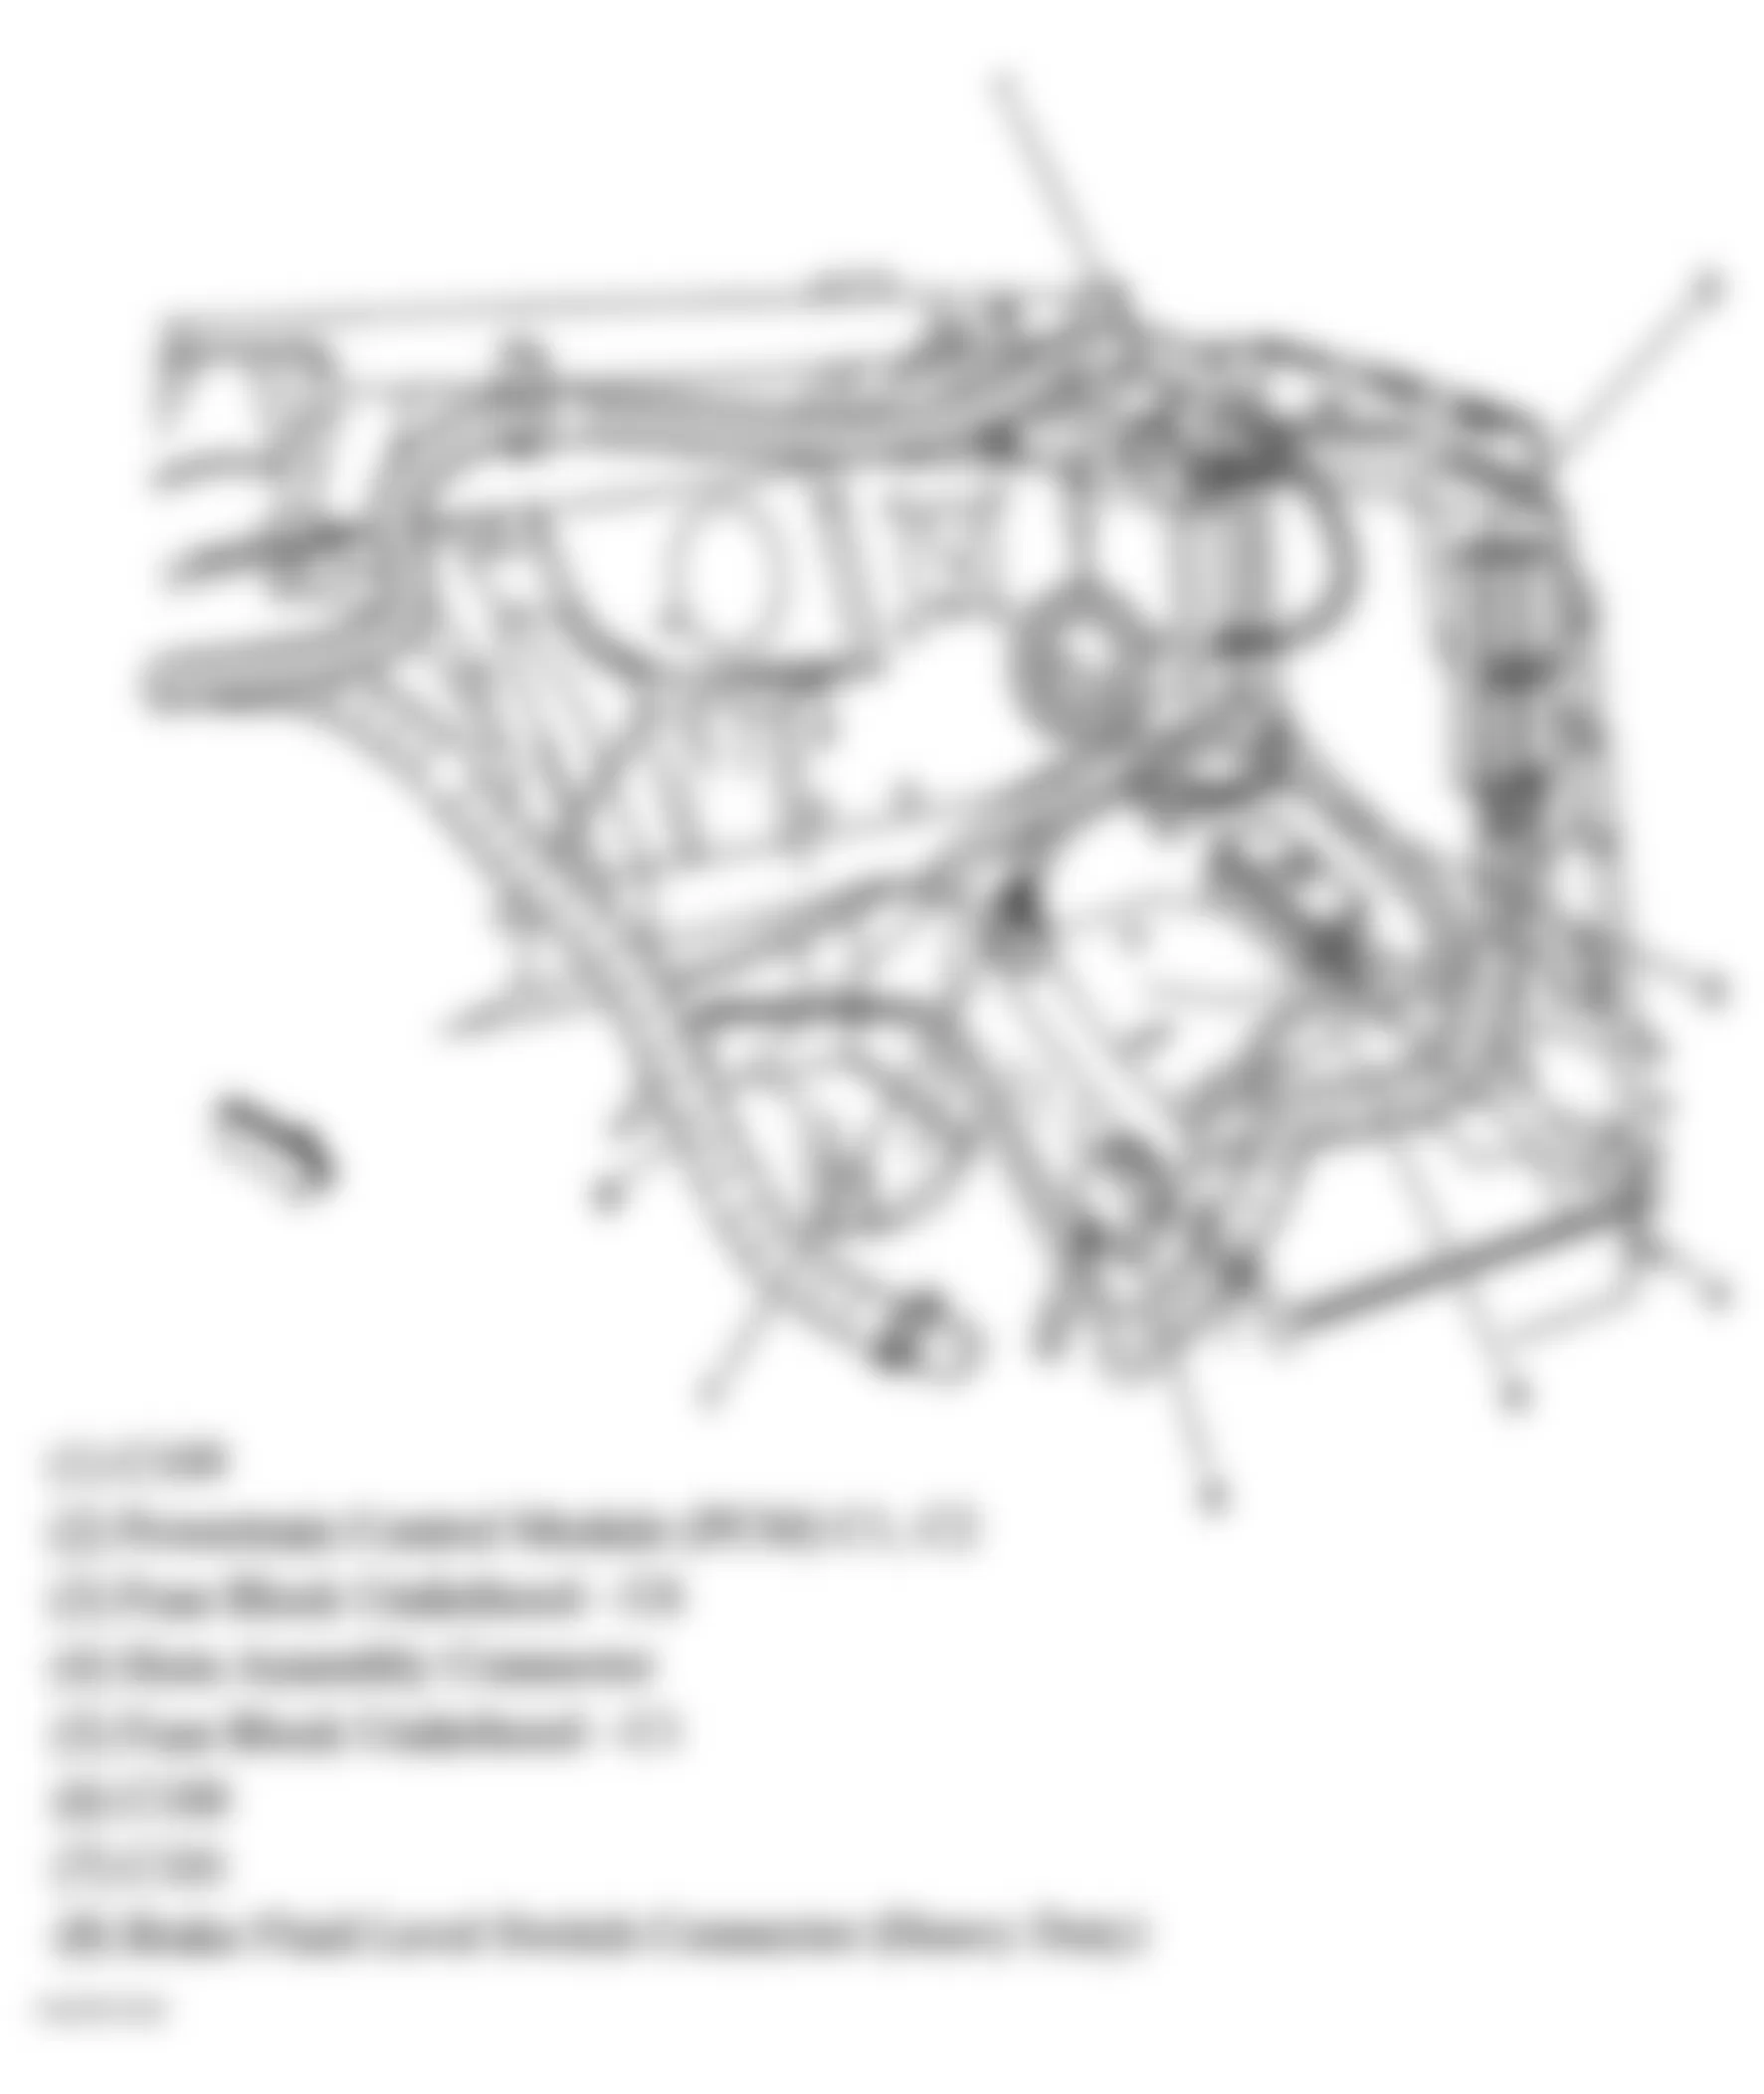 GMC Savana G2500 2007 - Component Locations -  Left Rear Of Engine Compartment